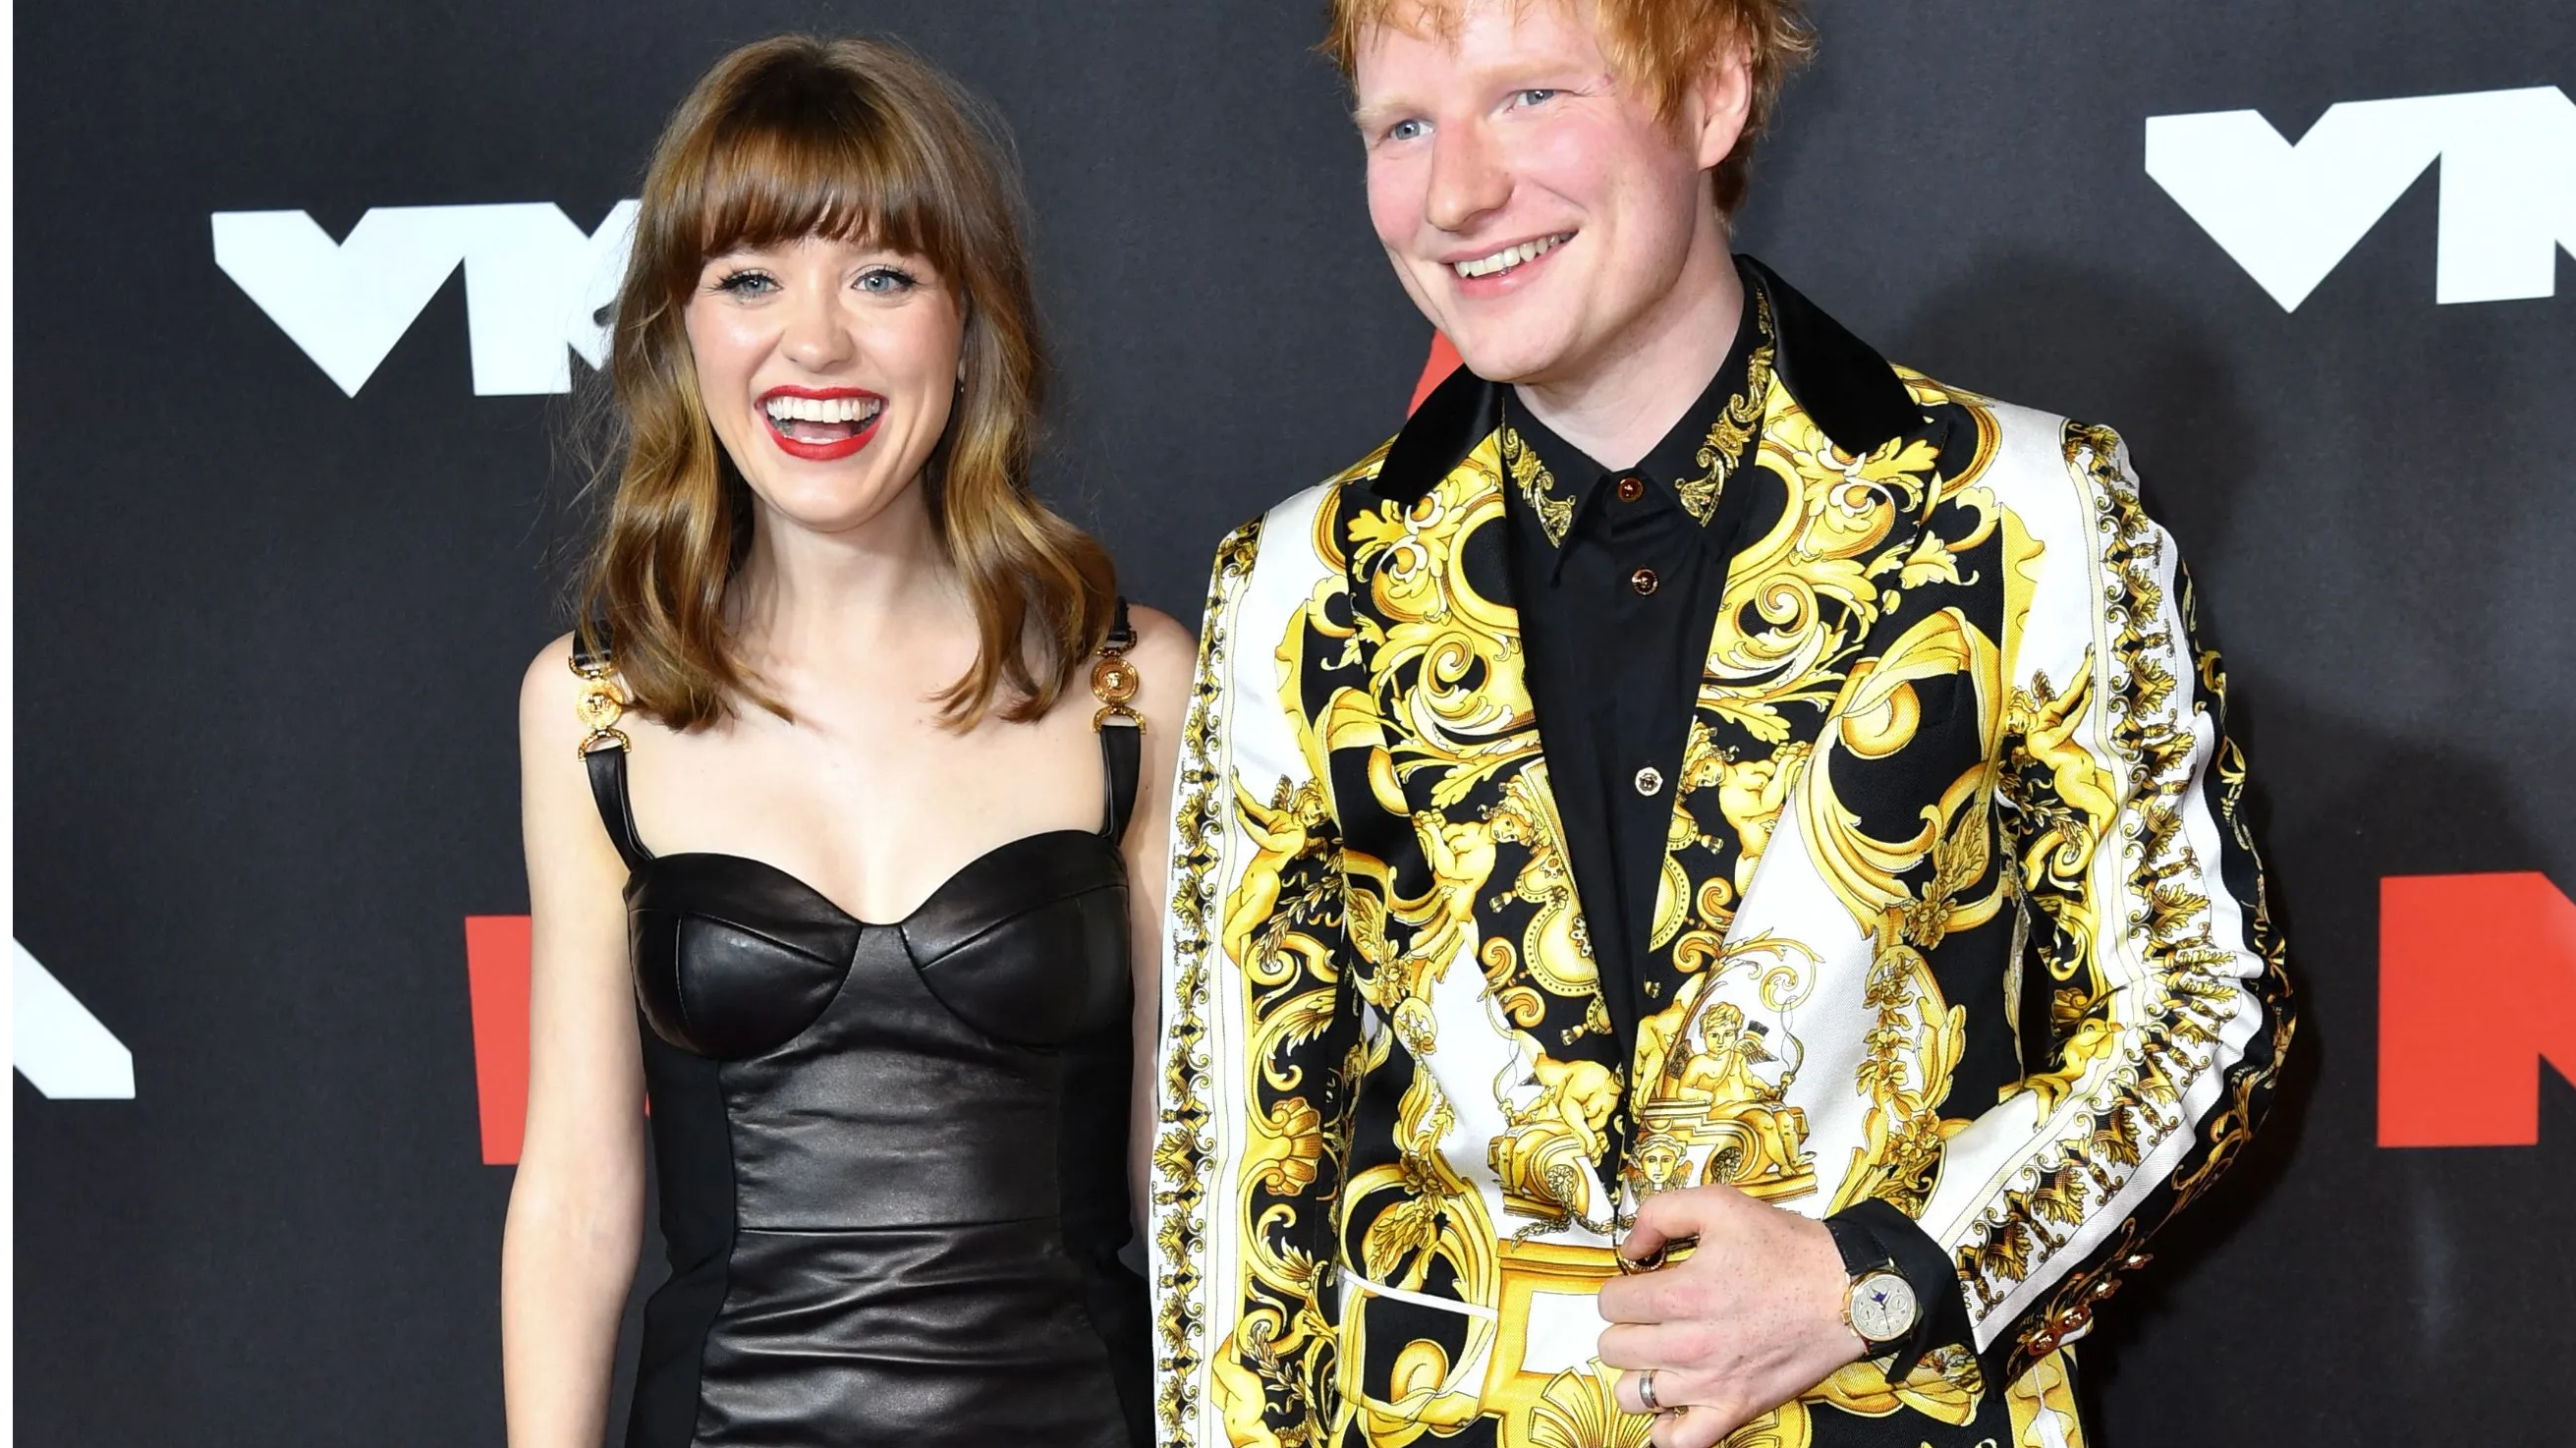 MTV VMAs 2021: From Ed Sheeran to Doja Cat, the best Red Carpet outfits